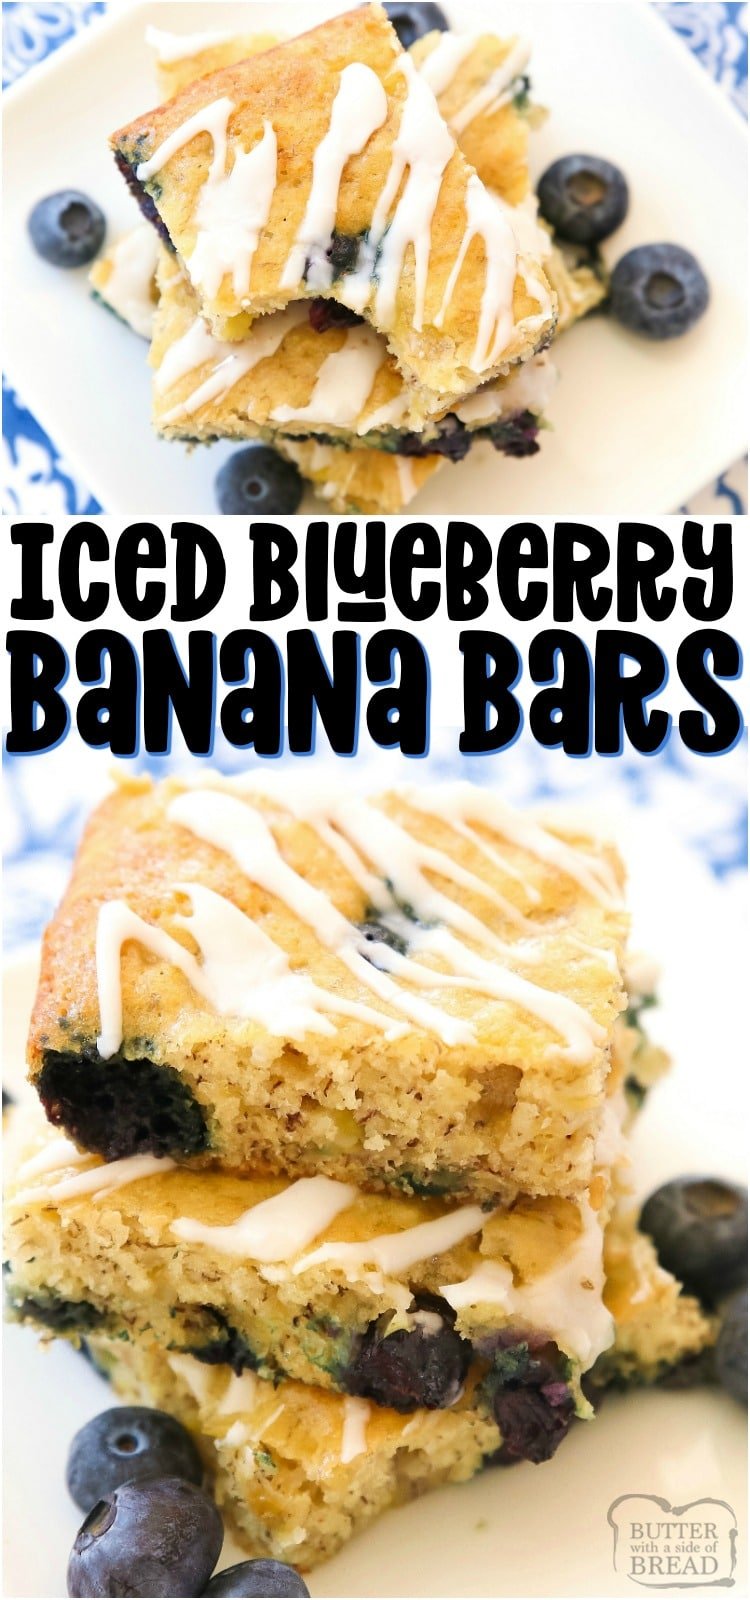 Glazed Blueberry Banana Bars are a simple & delicious ripe banana recipe that’s even better than banana bread! Great for breakfast, lunch, snacking, and it even makes a great dessert! #banana #blueberries #bananabars #baking #snack #recipe from BUTTER WITH A SIDE OF BREAD